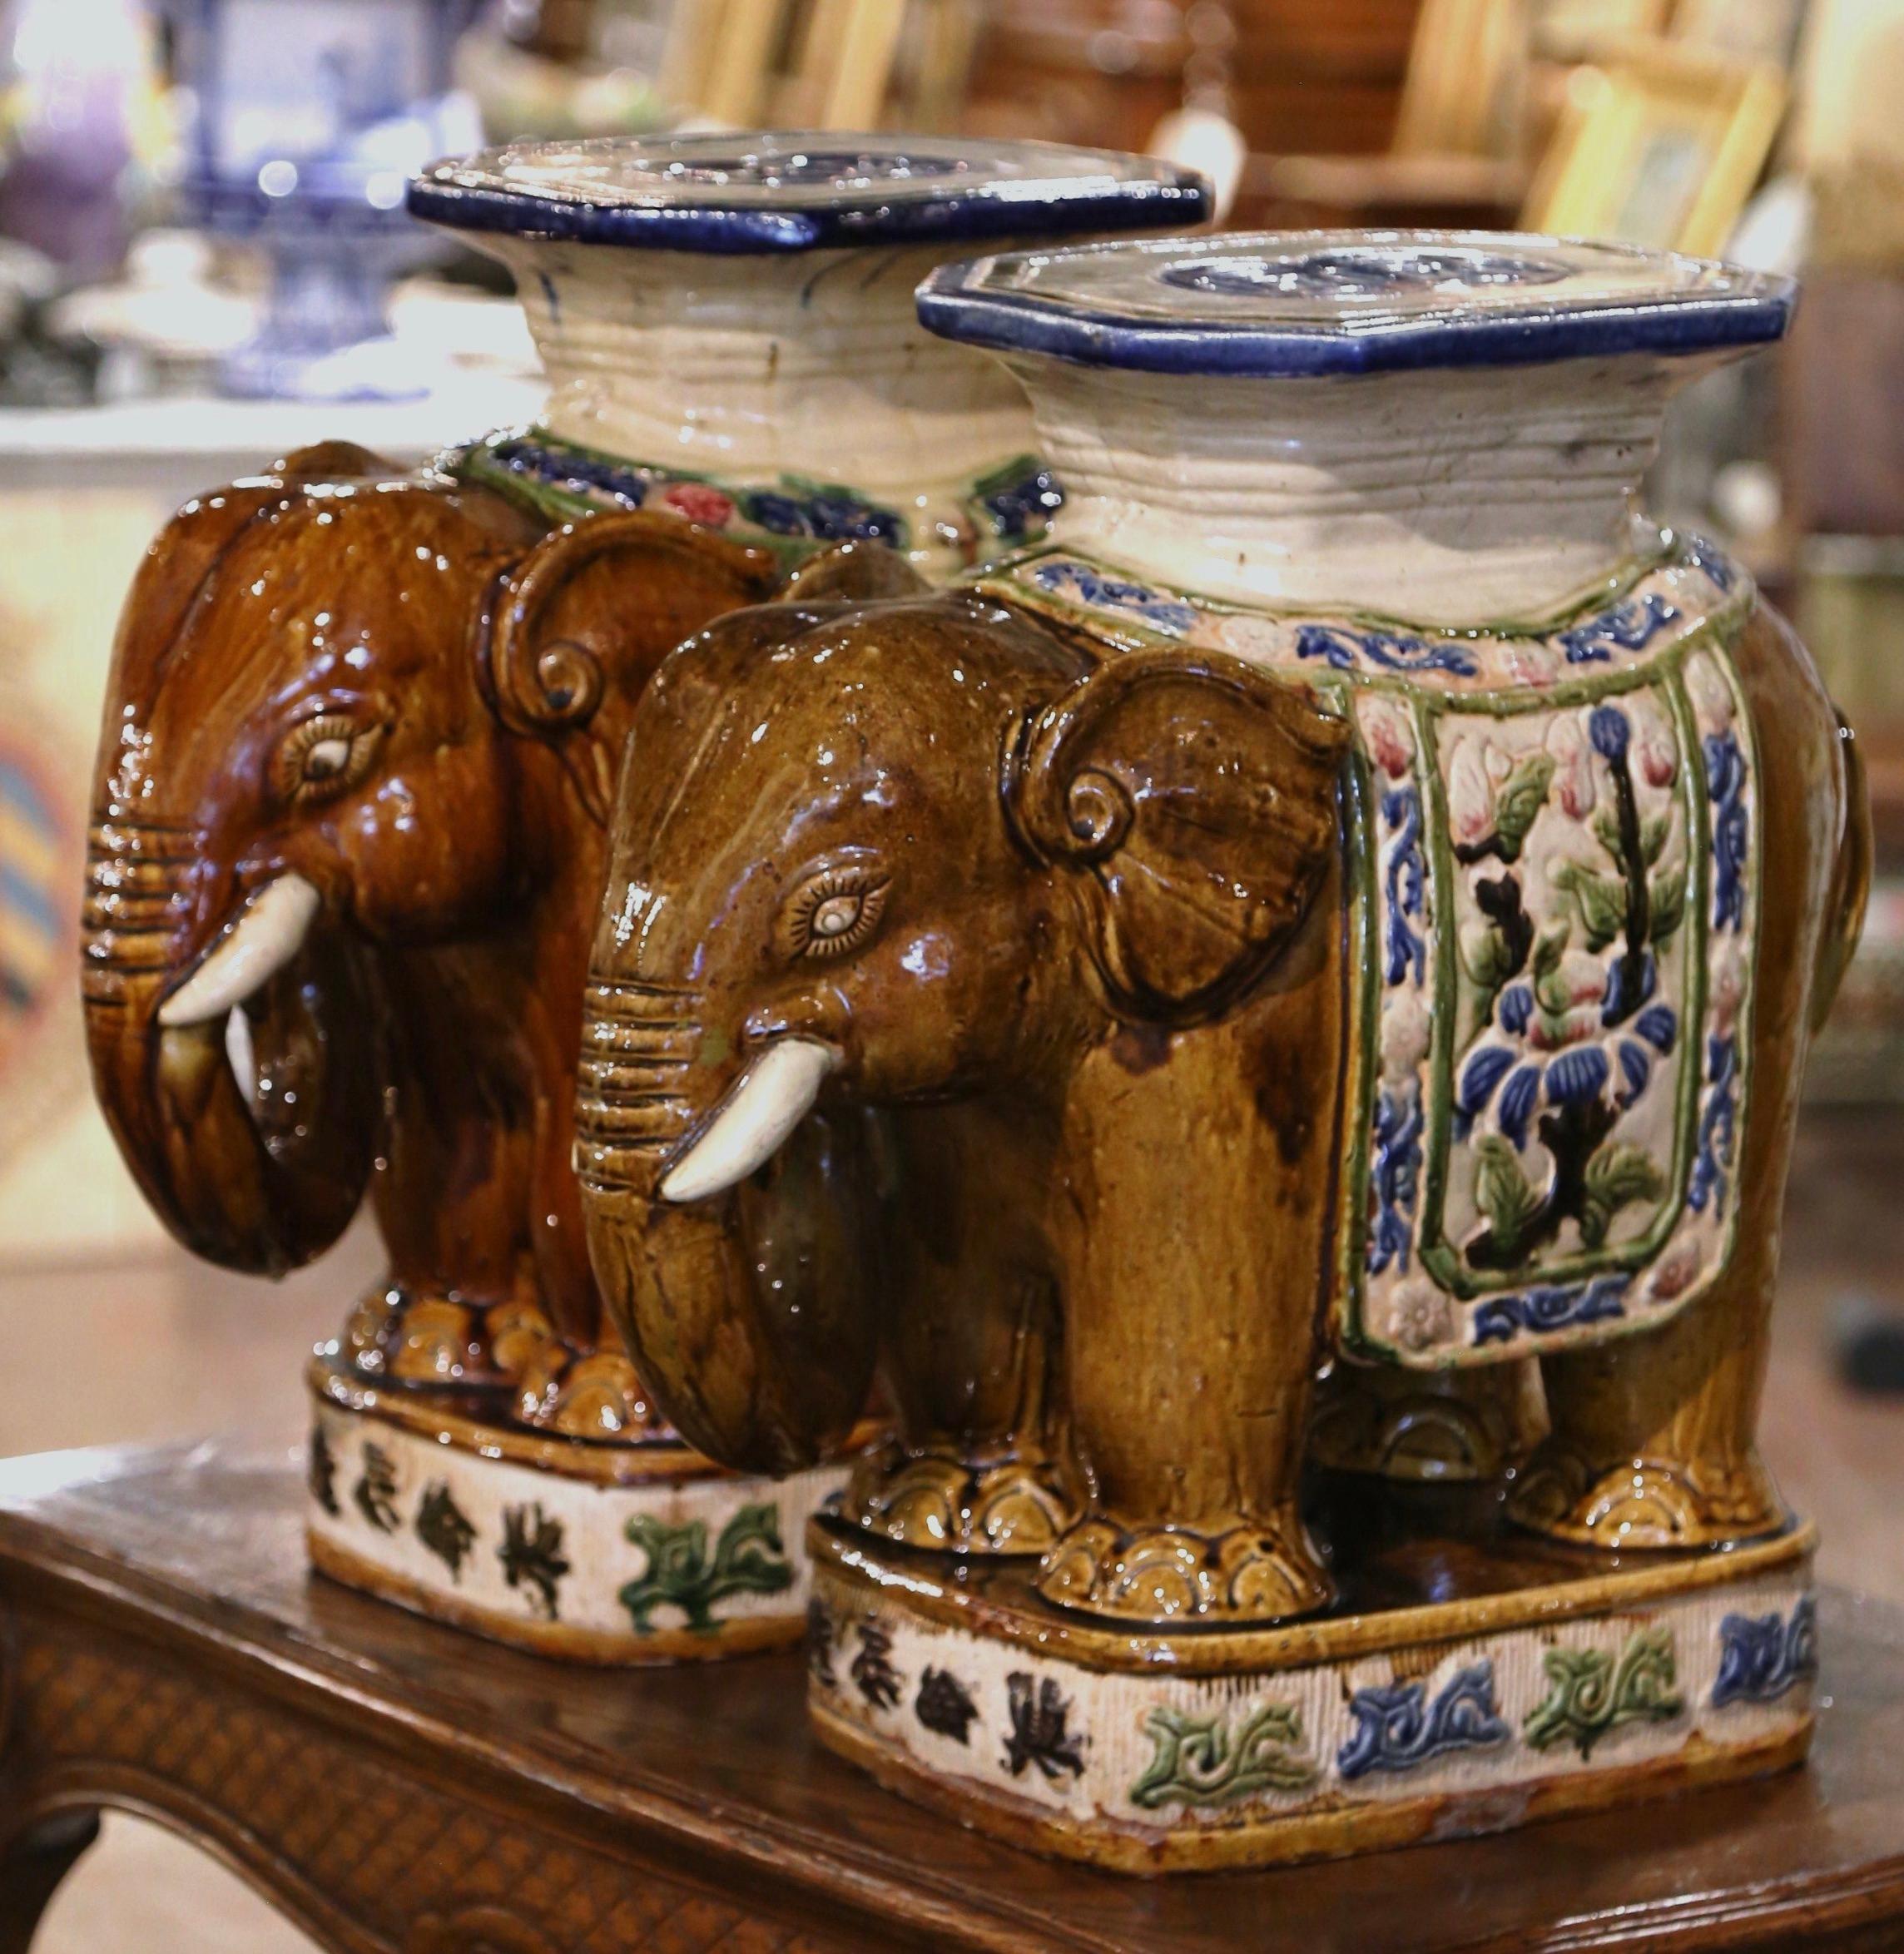 These colorful vintage porcelain garden seats were found in France. Crafted circa 1960, each large ceramic seating shaped as an elephant with his trunk lowered is heavily decorated in oriental finery; the colorful mammal has a rectangular seat at